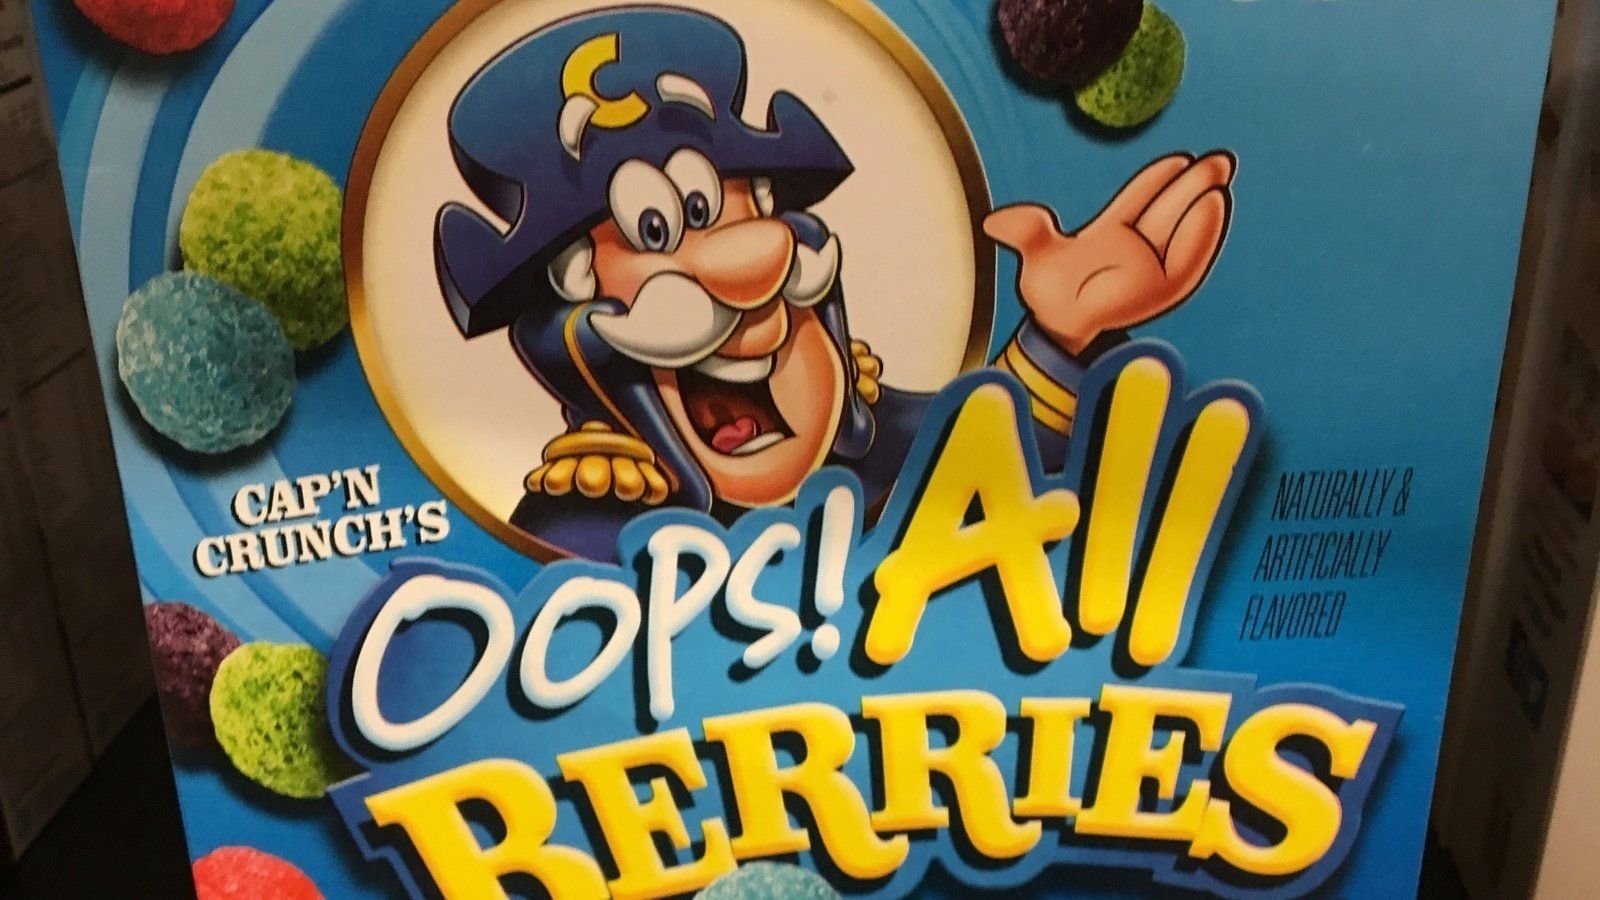 Petition · Quaker Oats, Convince Cap'n Crunch that it's time to drop the Oops! from Oops! All Berries · Change.org